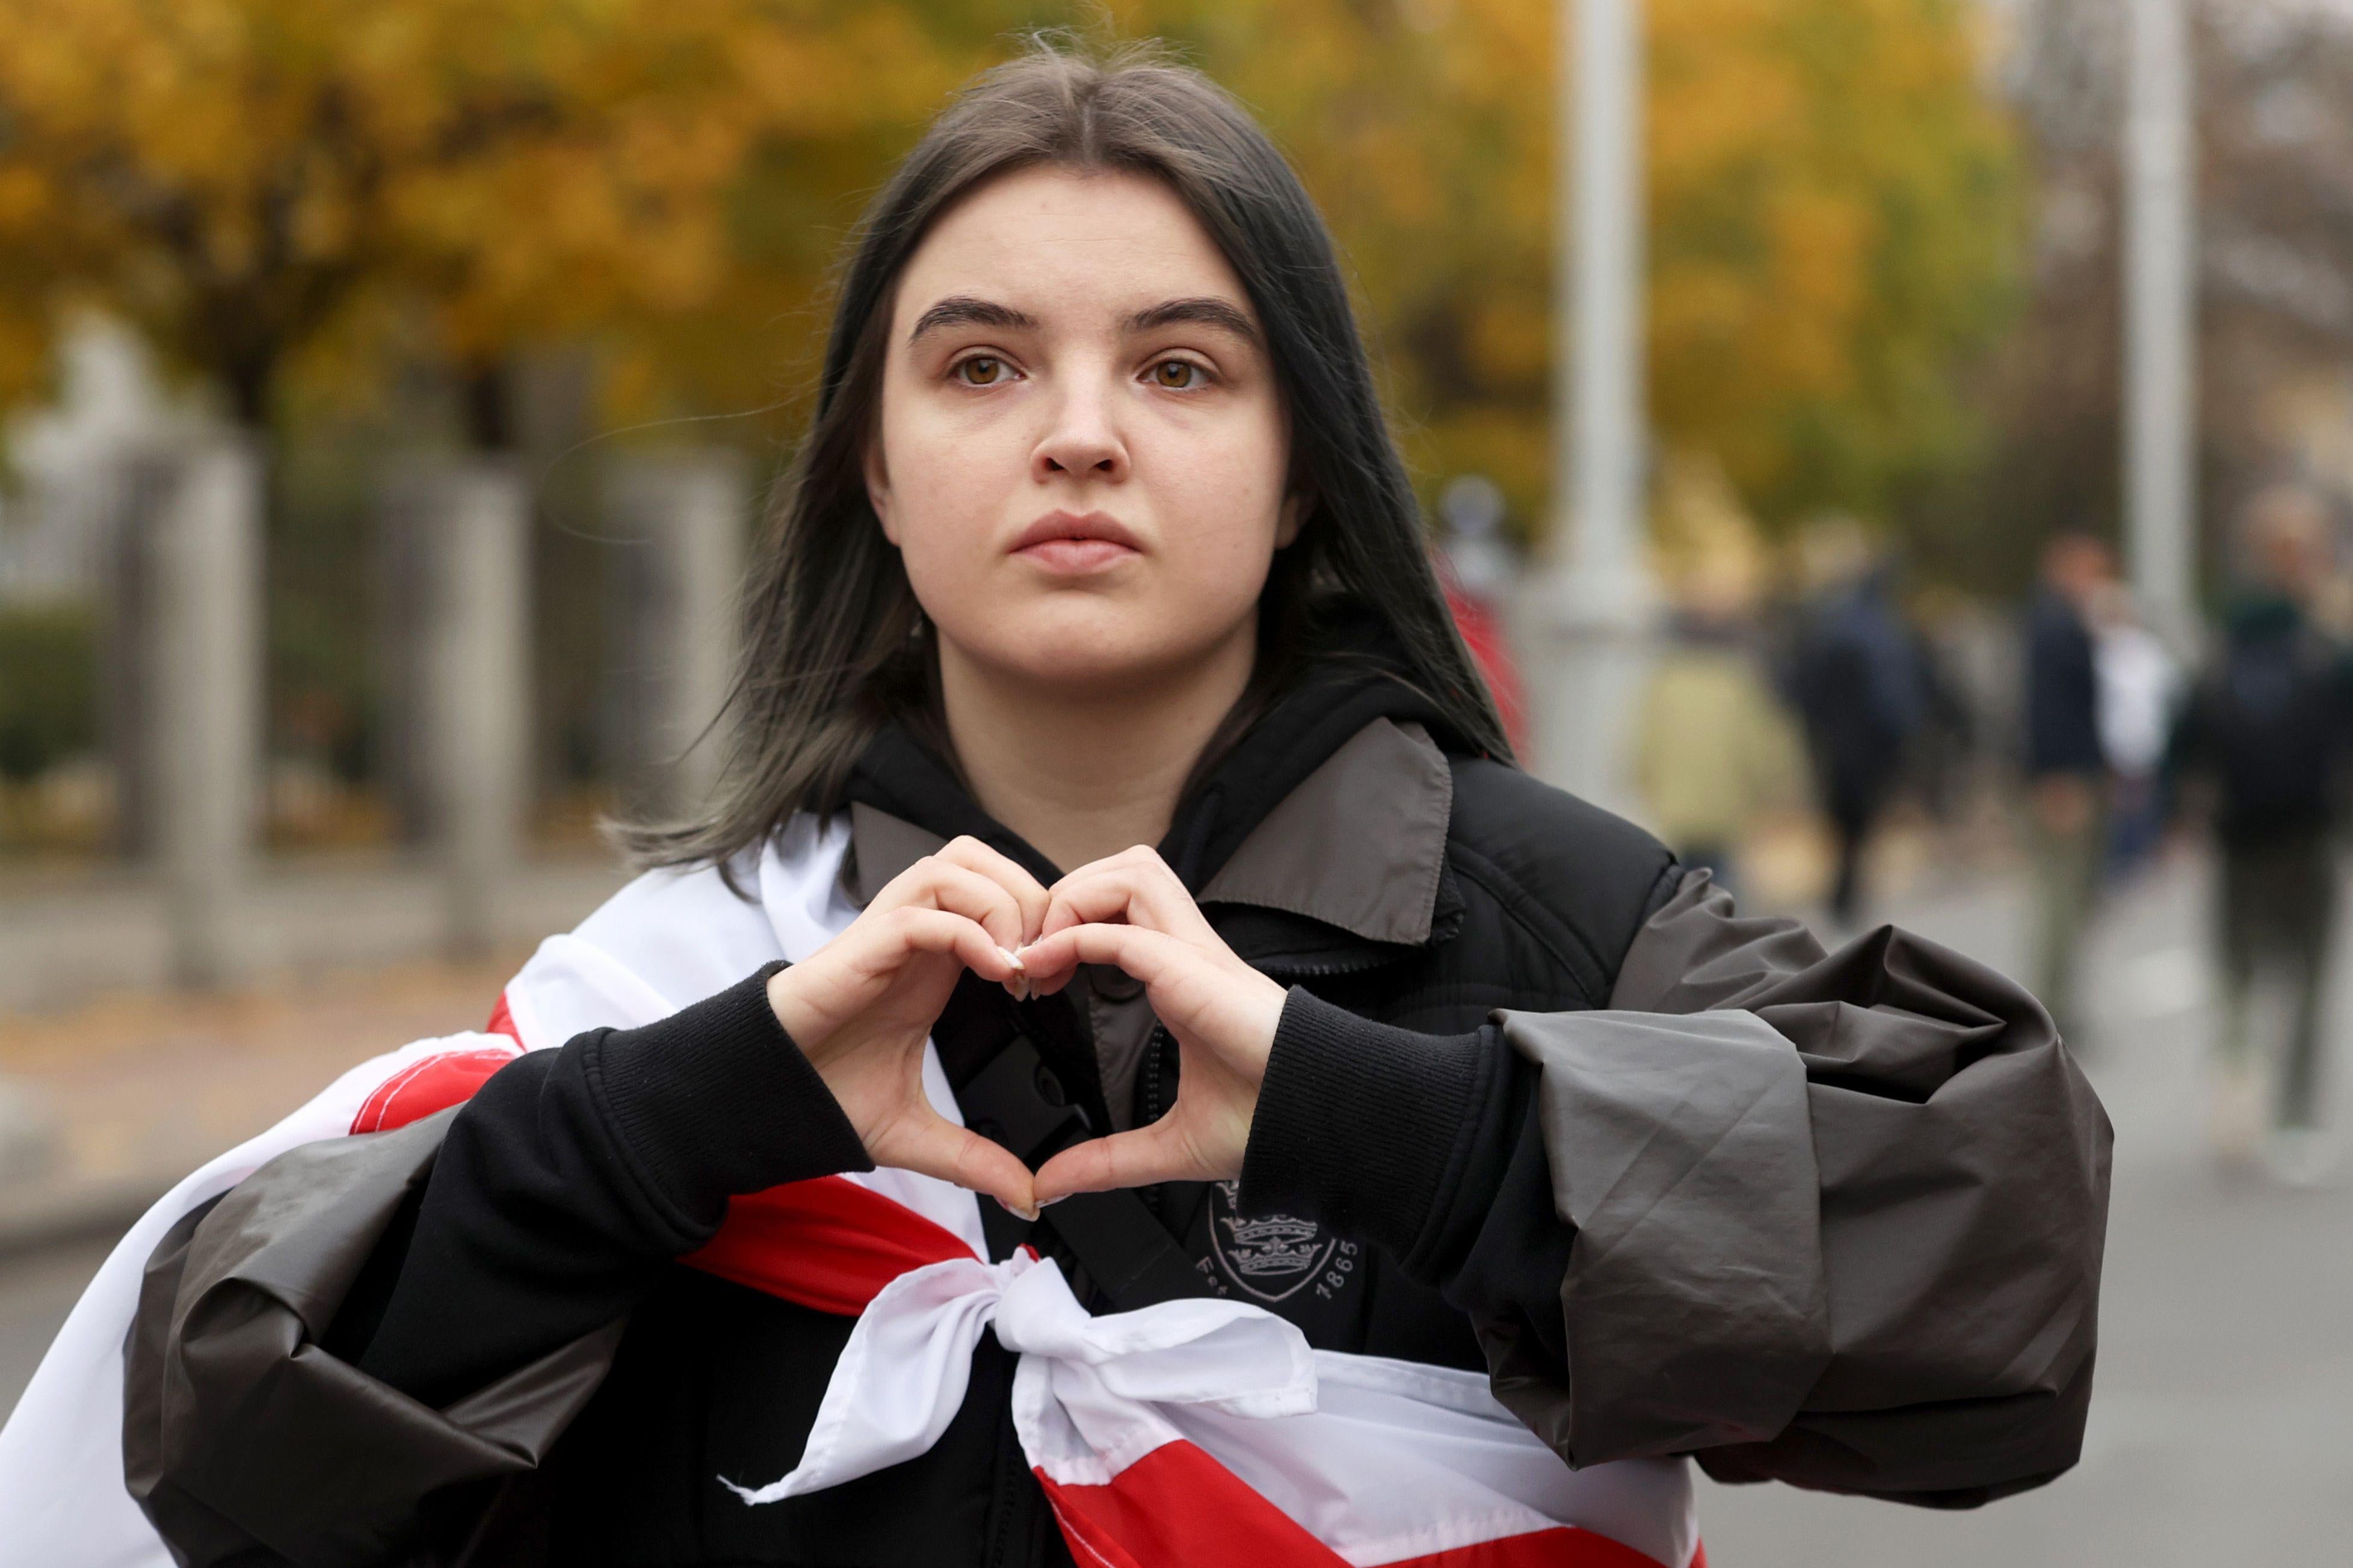 A girl gestures making a heart shape as she takes part in a parade through the streets in Minsk, on October 25, 2020, on the final day of an ultimatum set by the opposition for their embattled strongman leader to resign after months of mass protests. (Photo by Stringer / AFP) (Photo by STRINGER/AFP via Getty Images)